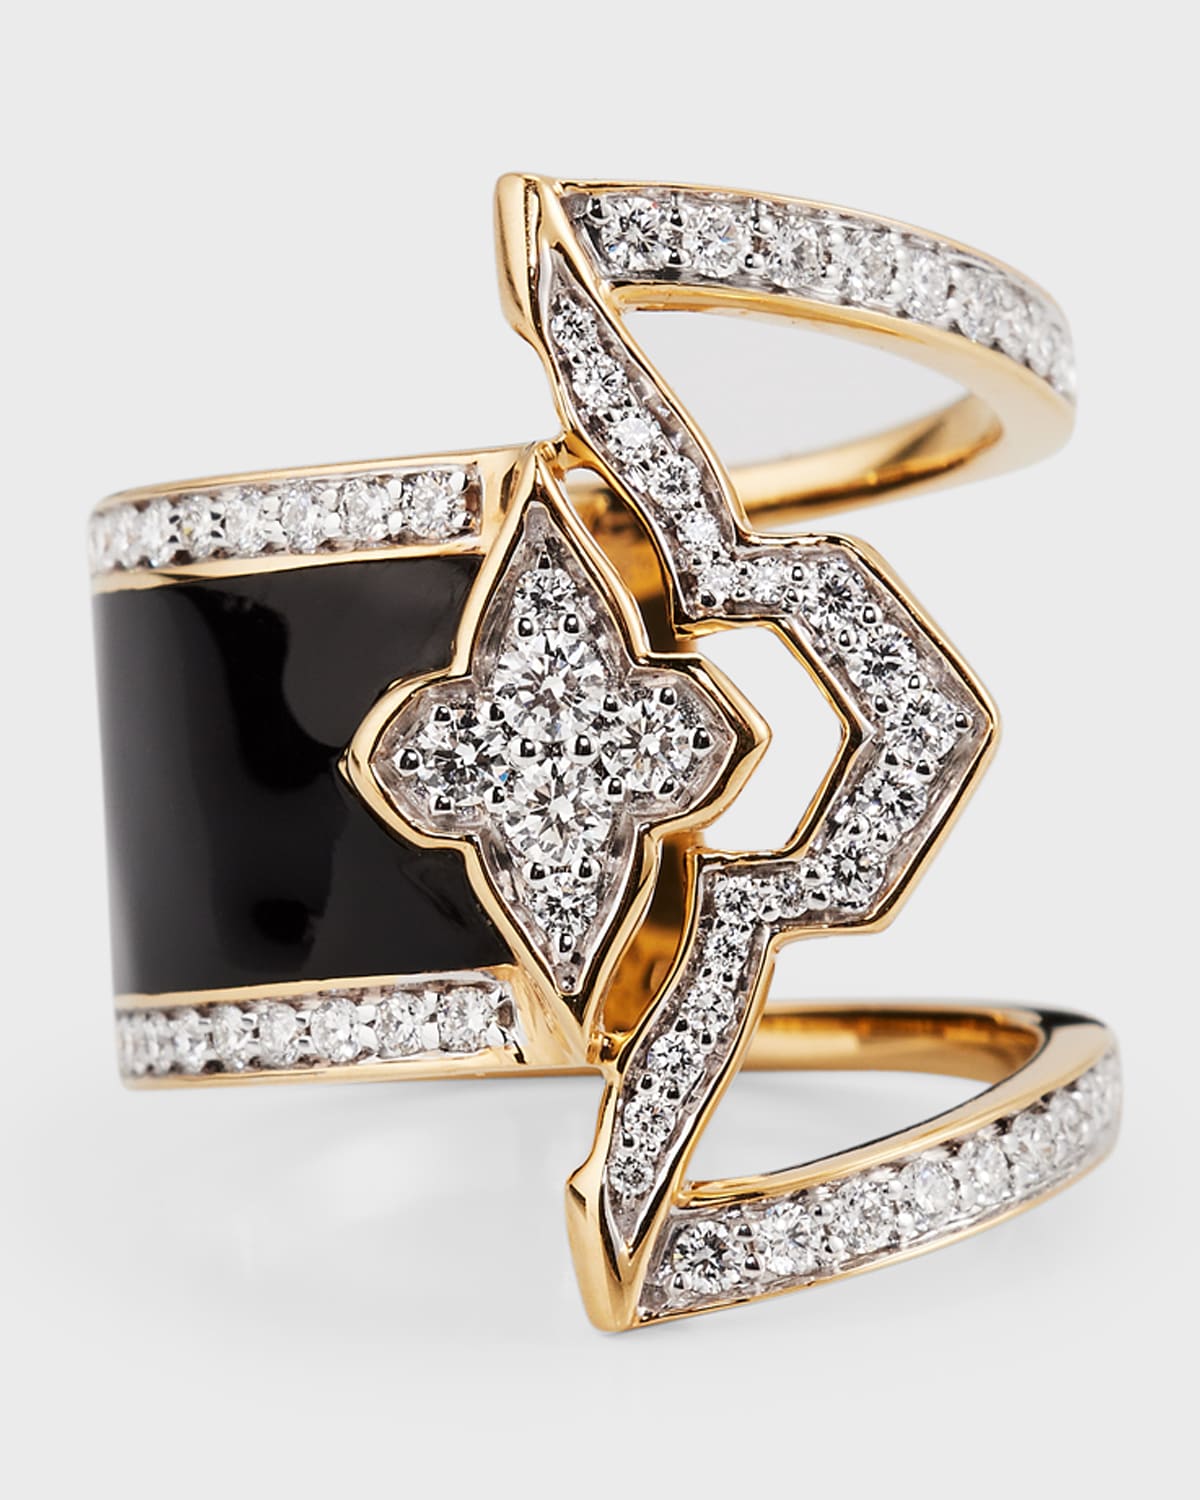 18K Yellow Gold Piano Black Edgy Ring, Size 7